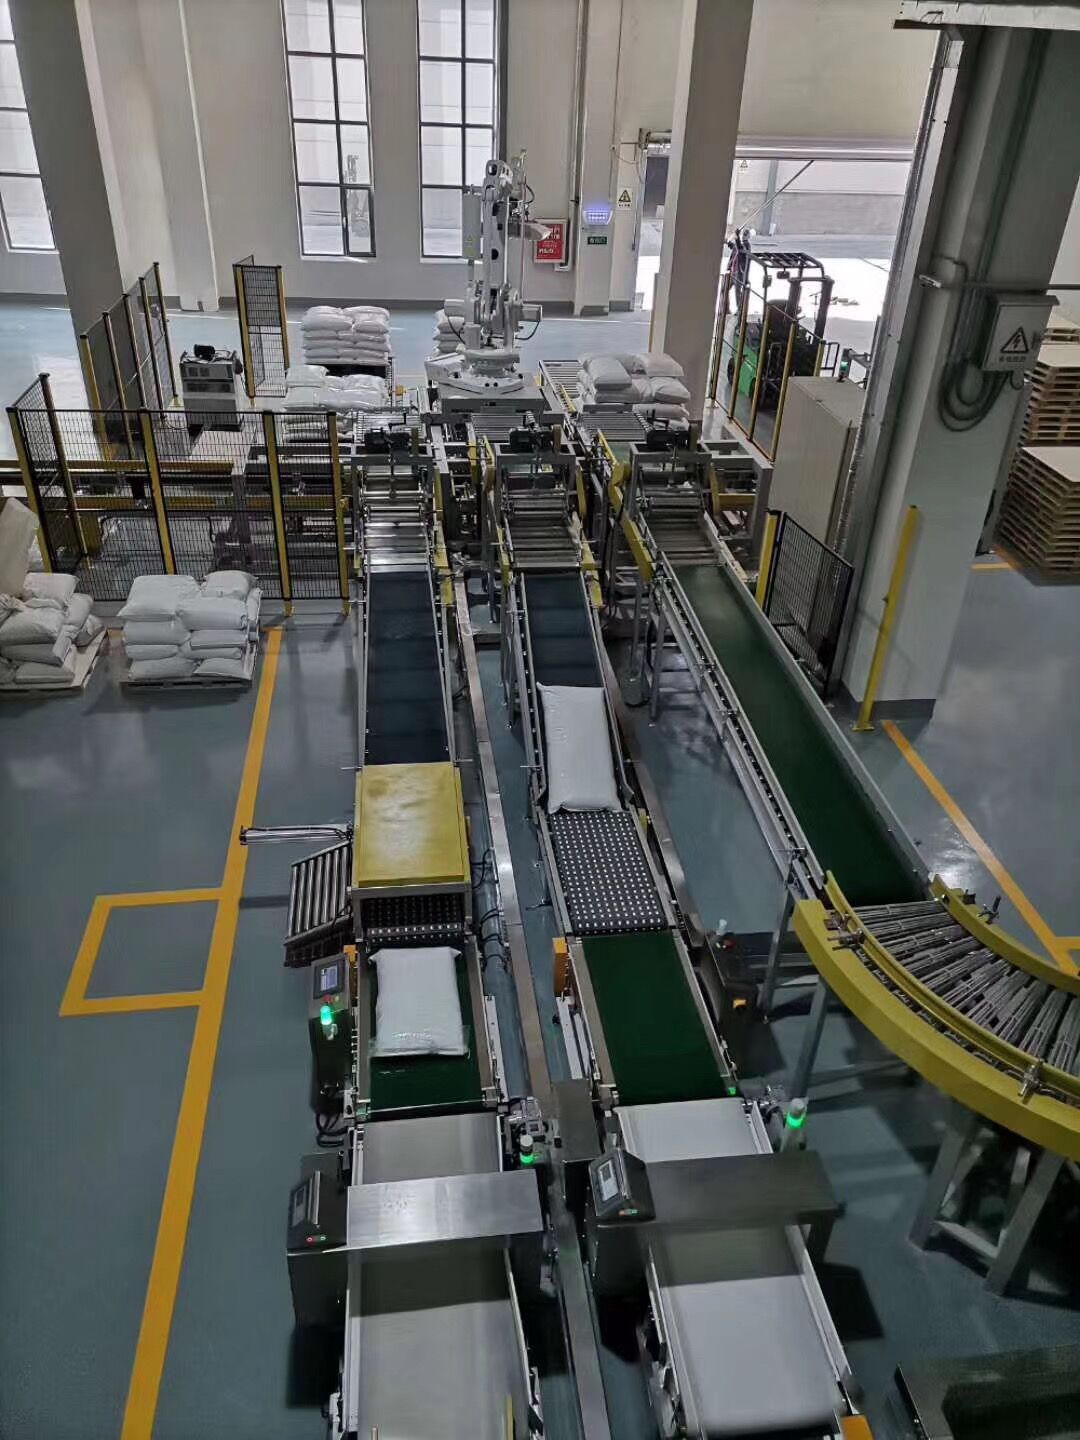 packing machine Soybean Meal bagging machine Grains bagging machine Whole Grains packing machine fully Automatic Packing Palletizing Line, Fully Automatic Packing Line, Fully Automatic Bagging Line, F